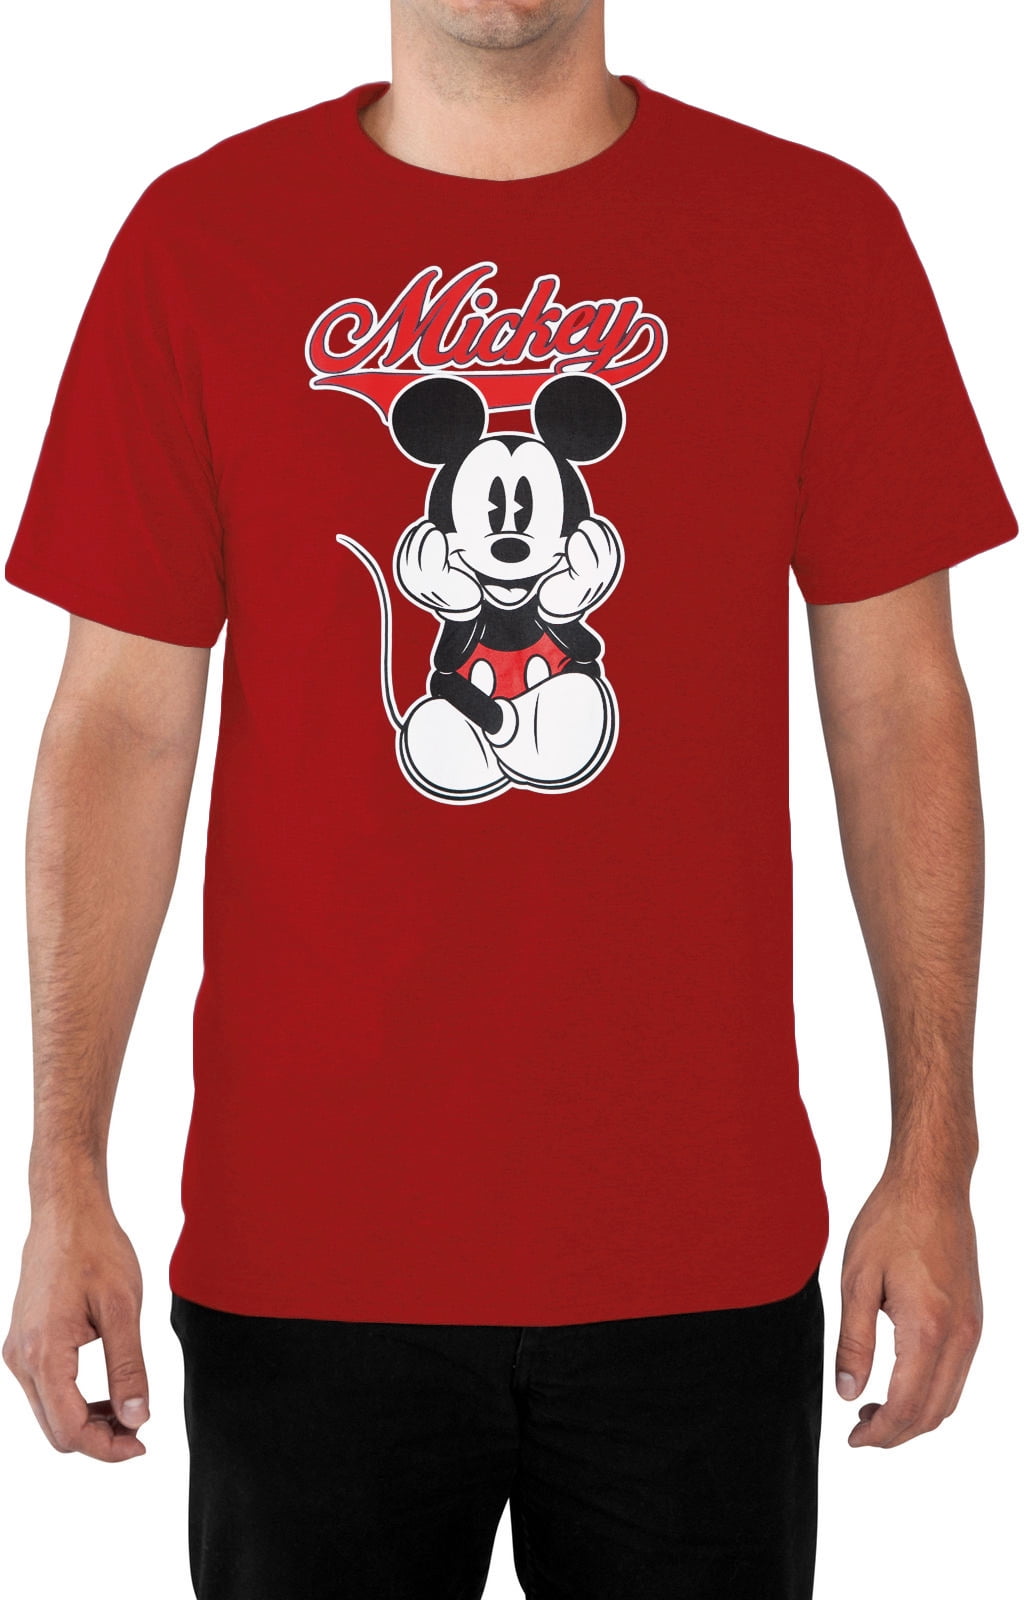 red mickey mouse t shirt